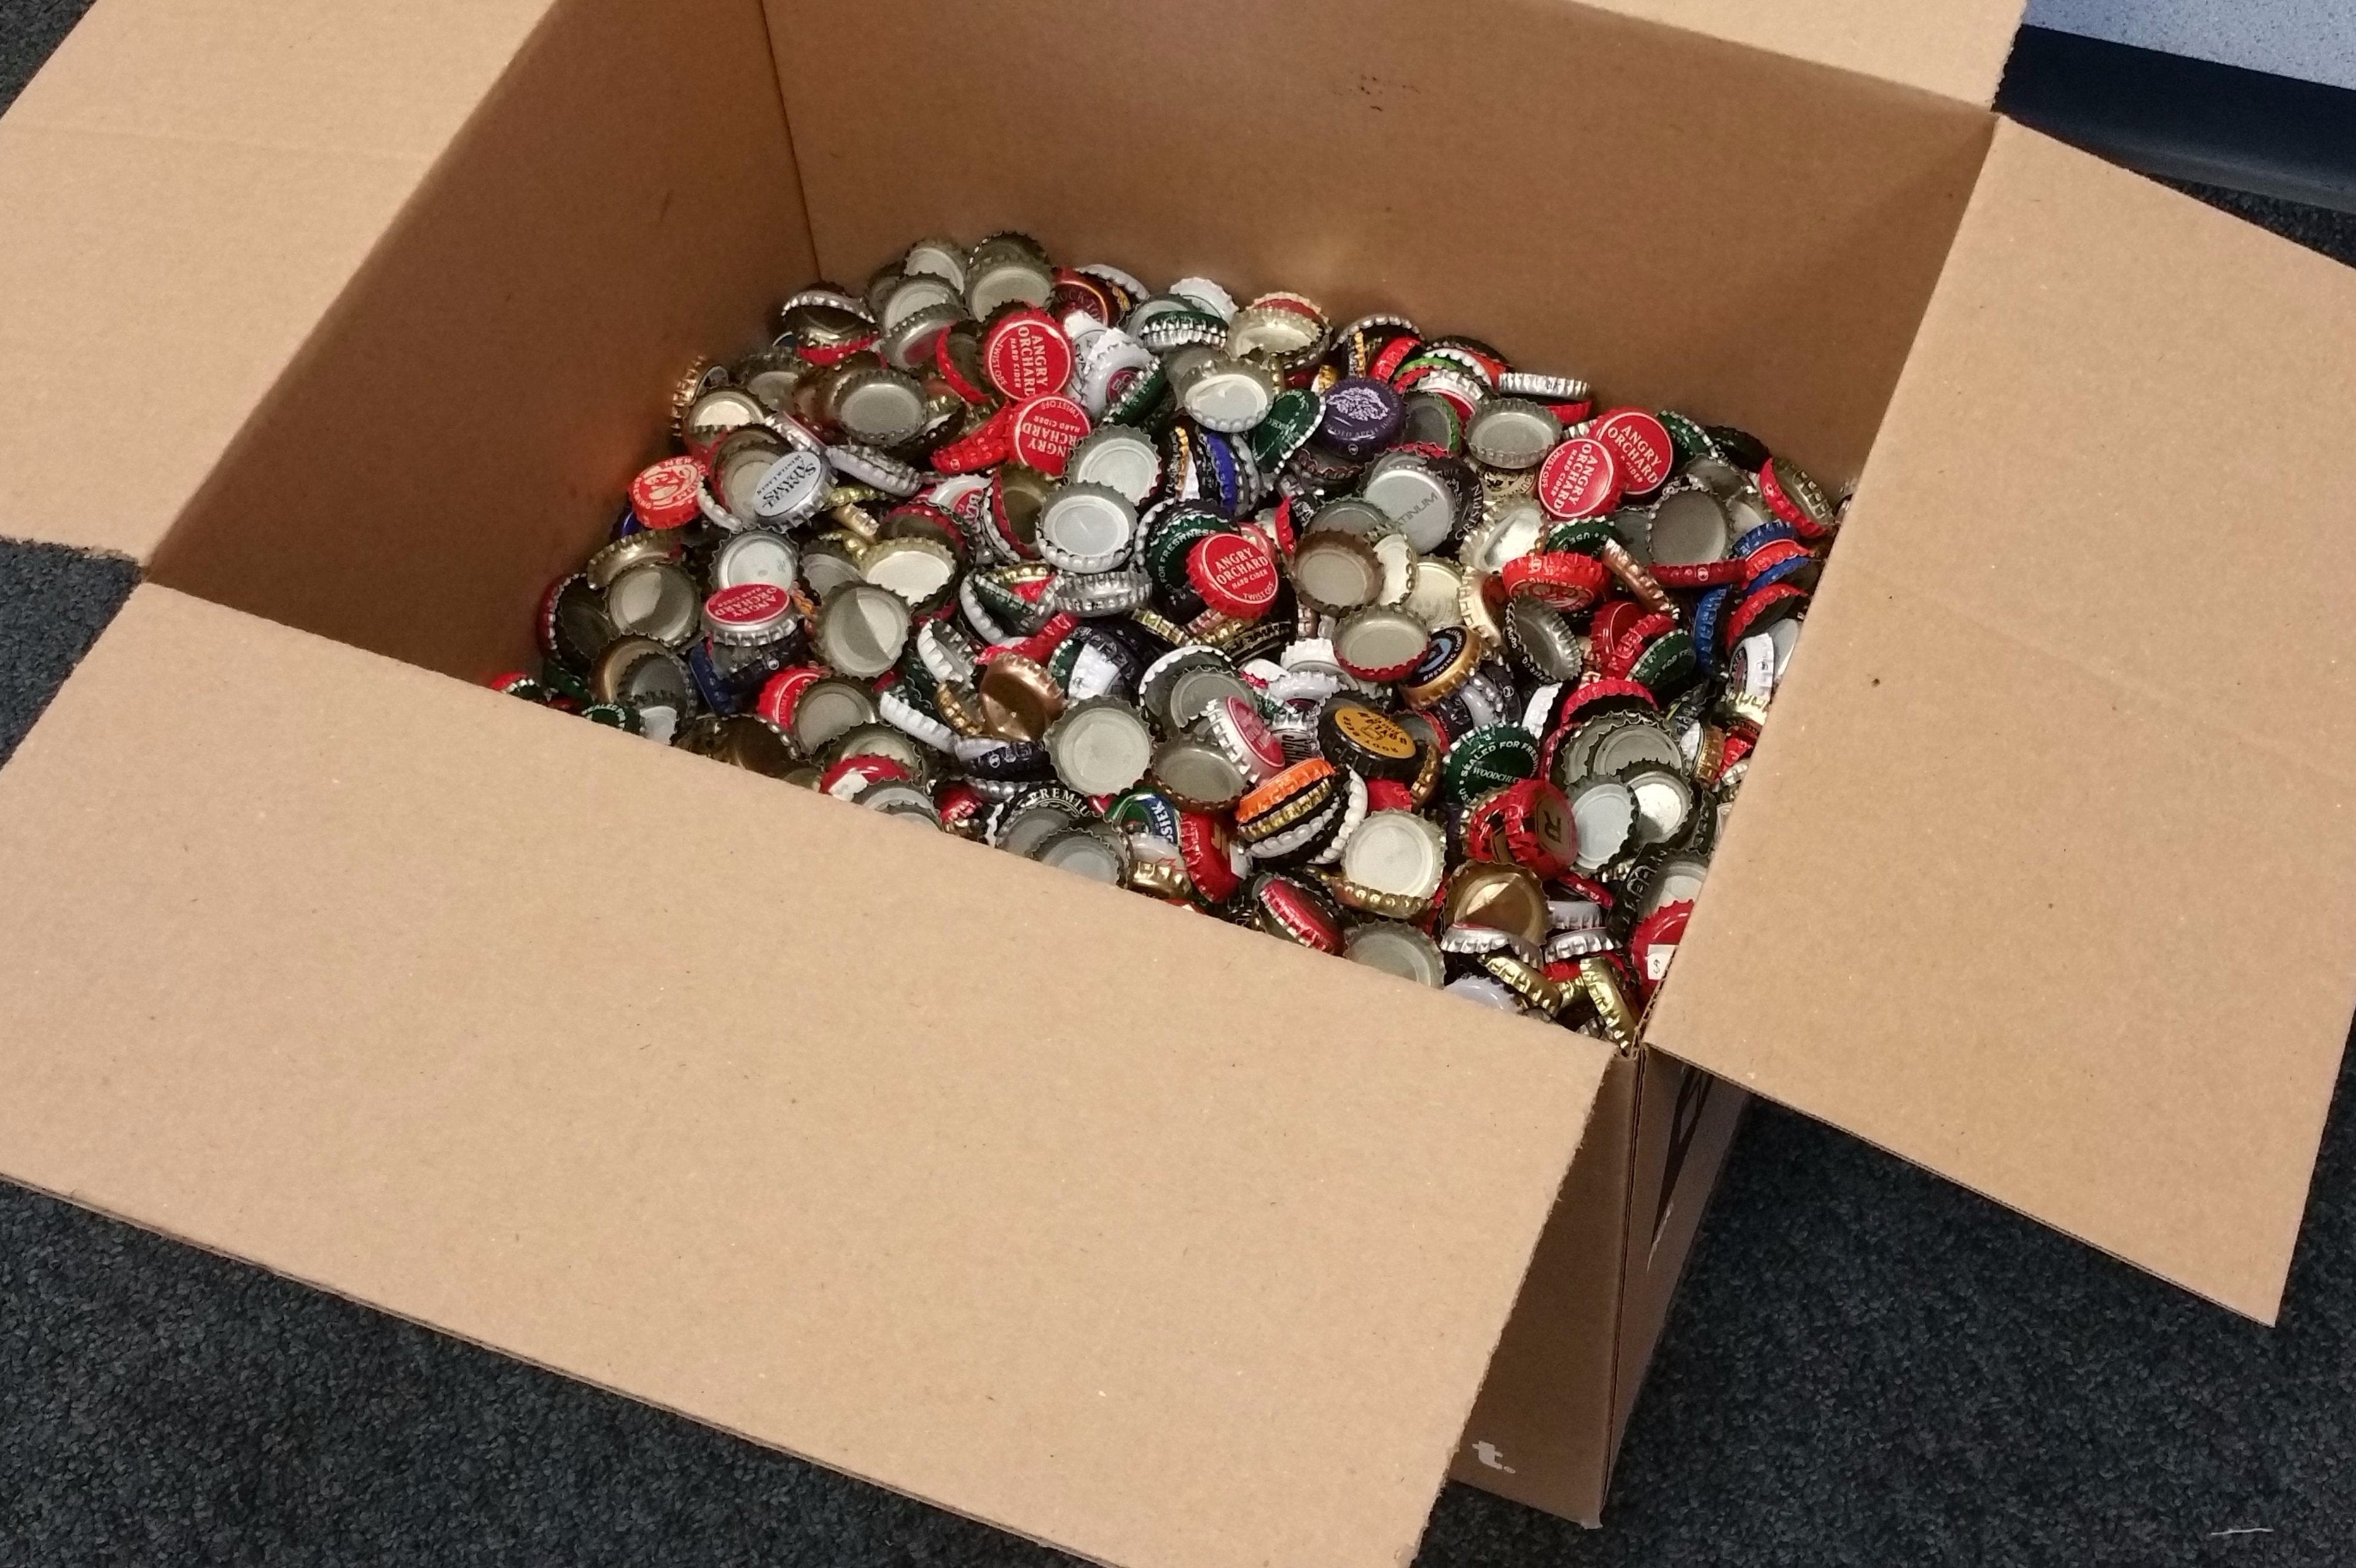 Image for Fan attempts to pre-order Fallout 4 with bottle caps